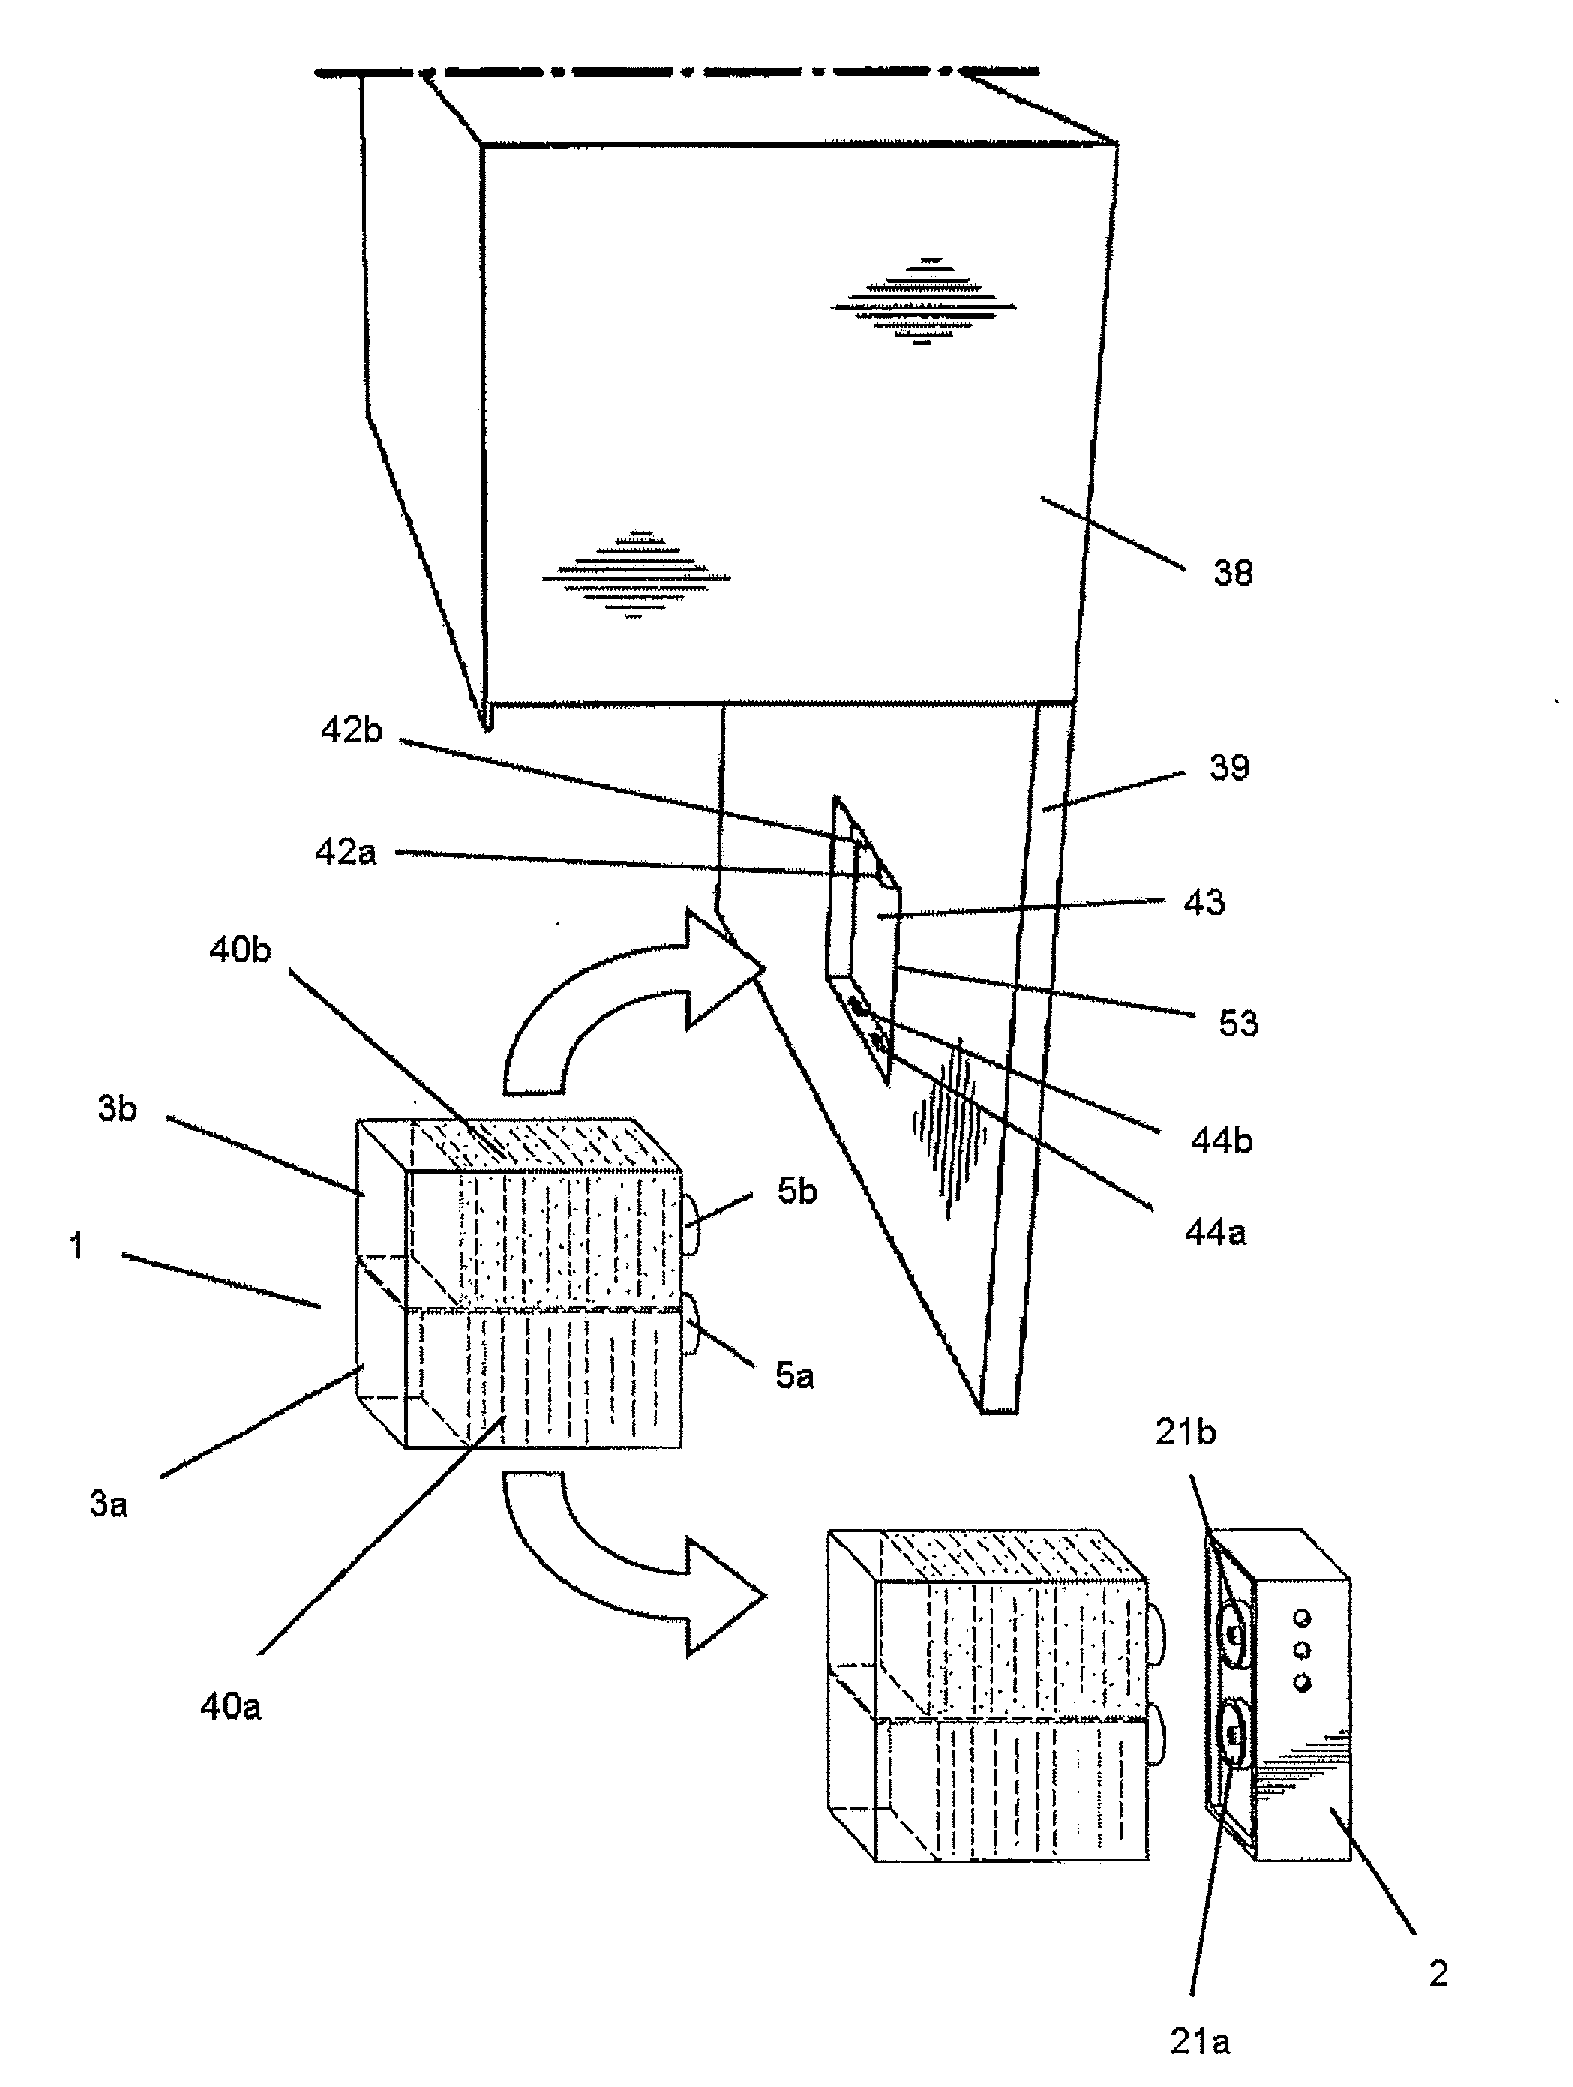 Dispenser having a transmitter and/or receiver unit for the wireless transmission of signals